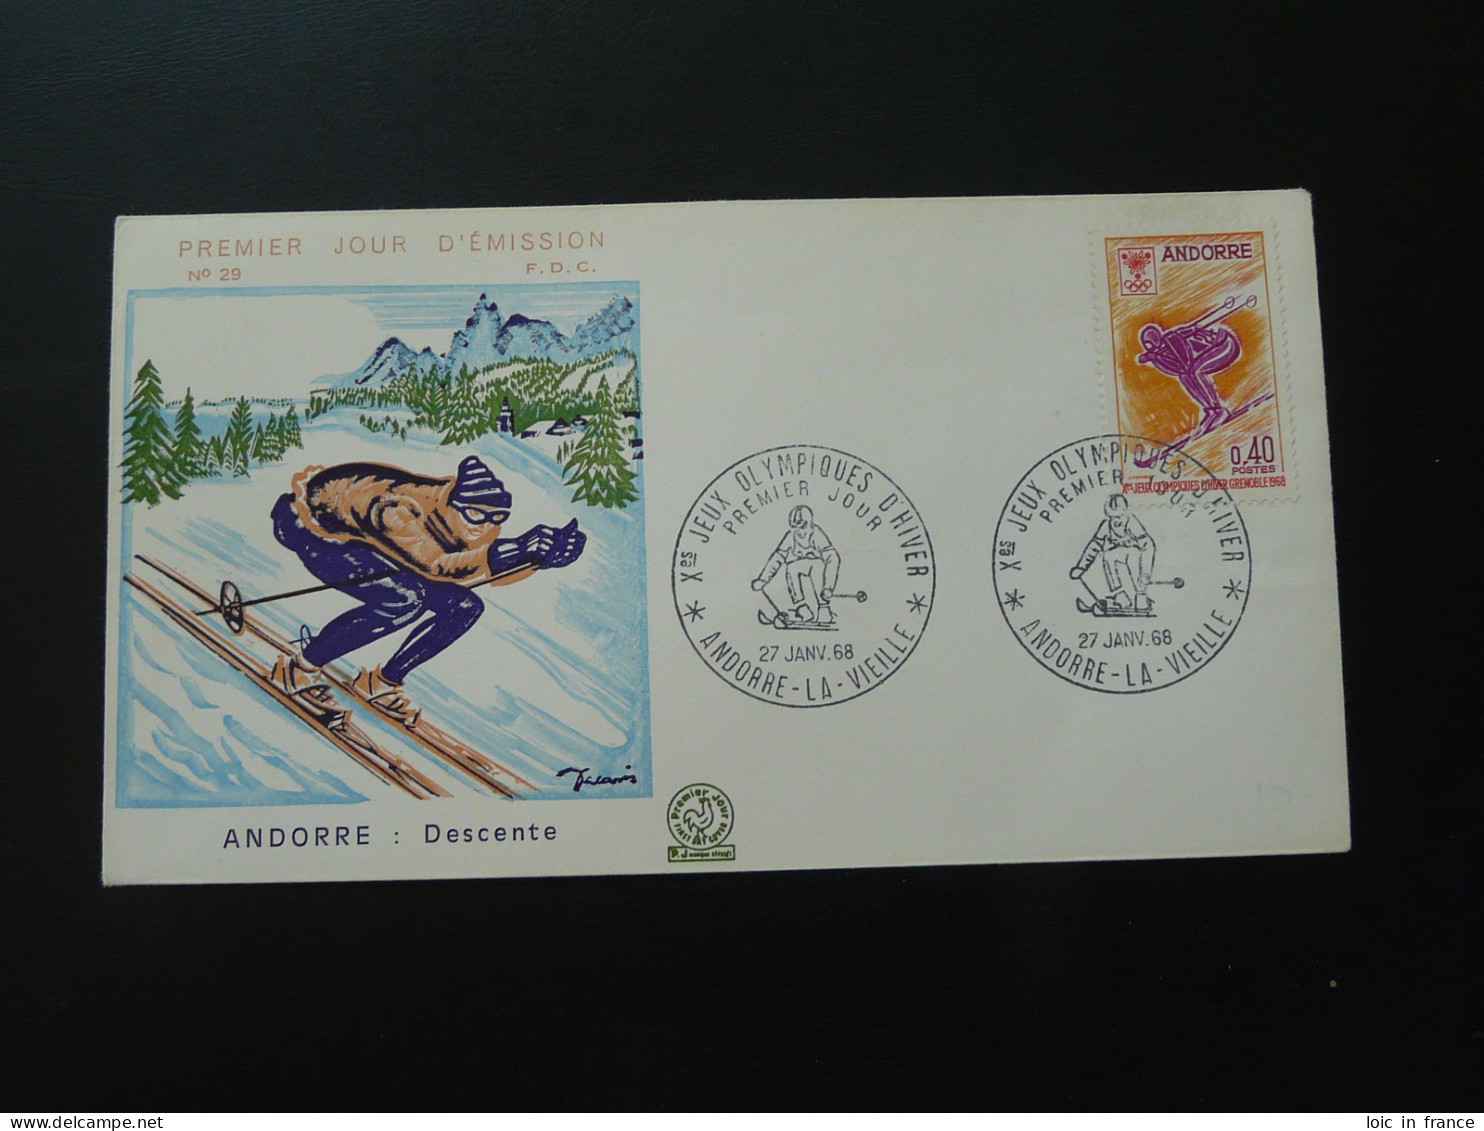 FDC Jeux Olympiques Grenoble Olympic Games Illustration De Decaris Andorre 1968 - Hiver 1968: Grenoble